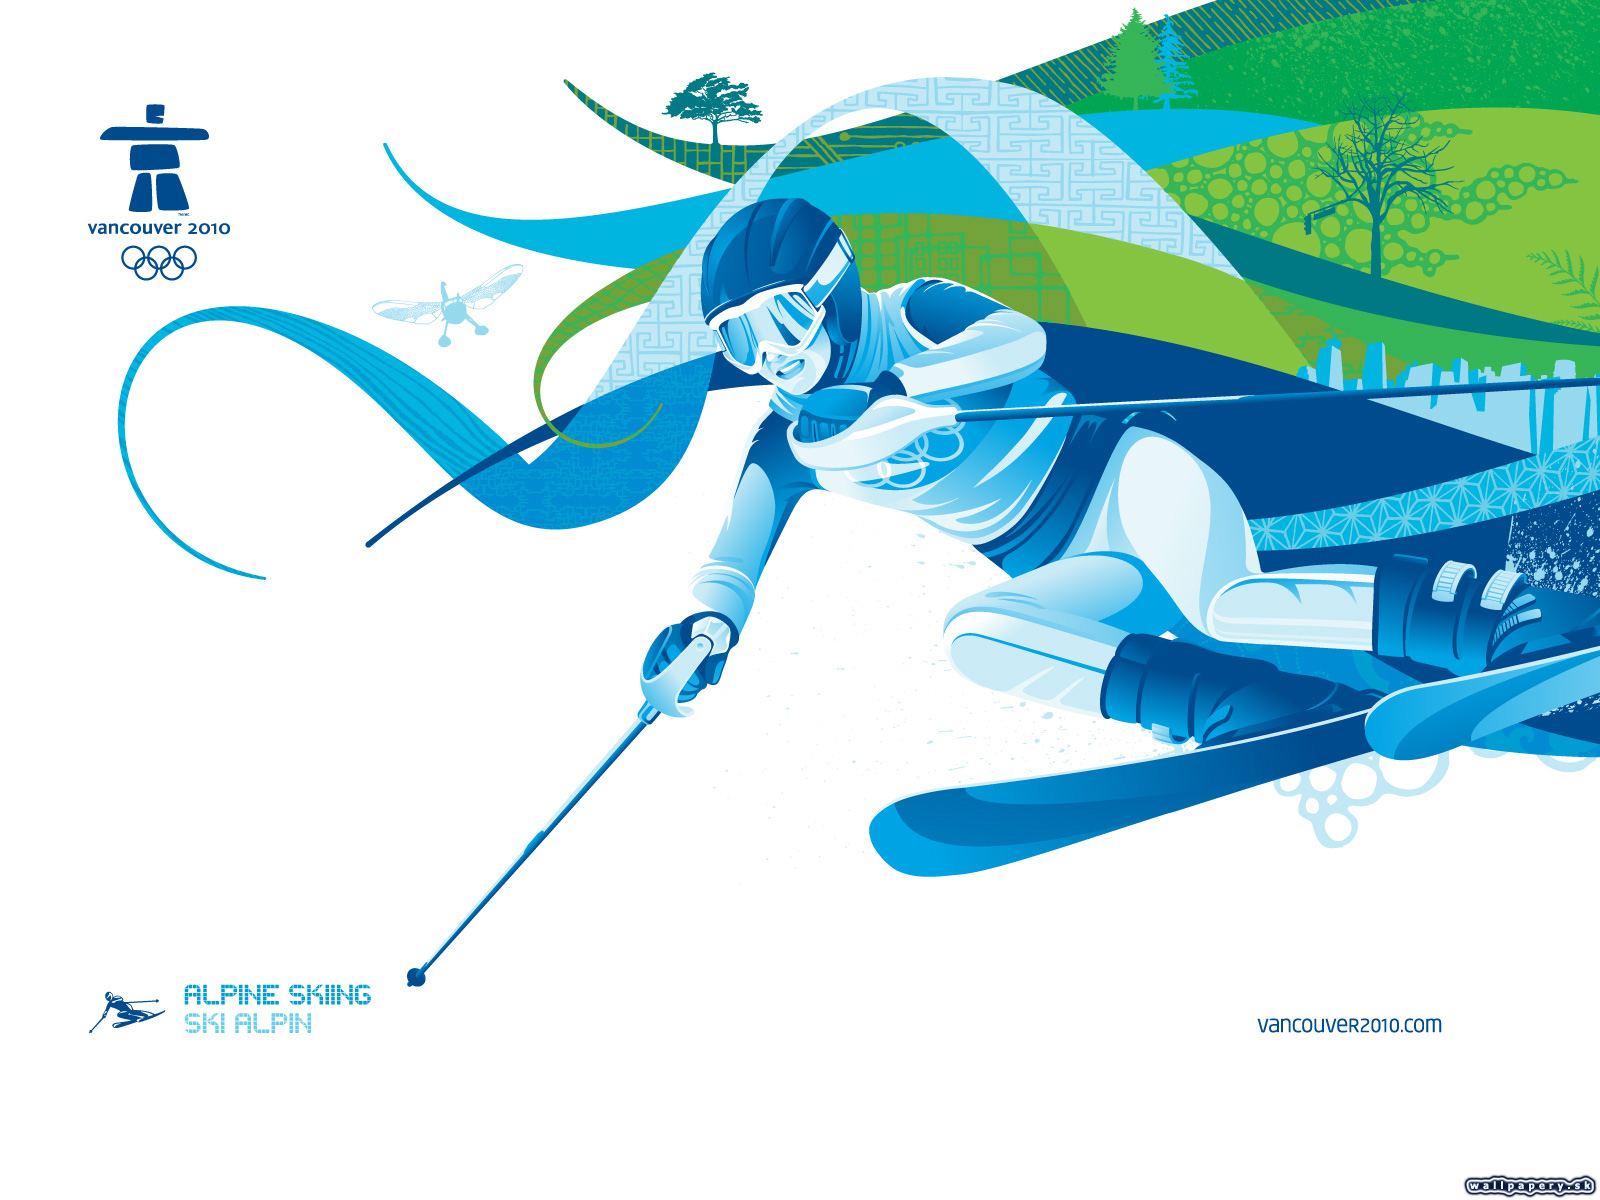 Vancouver 2010 - The Official Video Game of the Olympic Winter Games - wallpaper 26